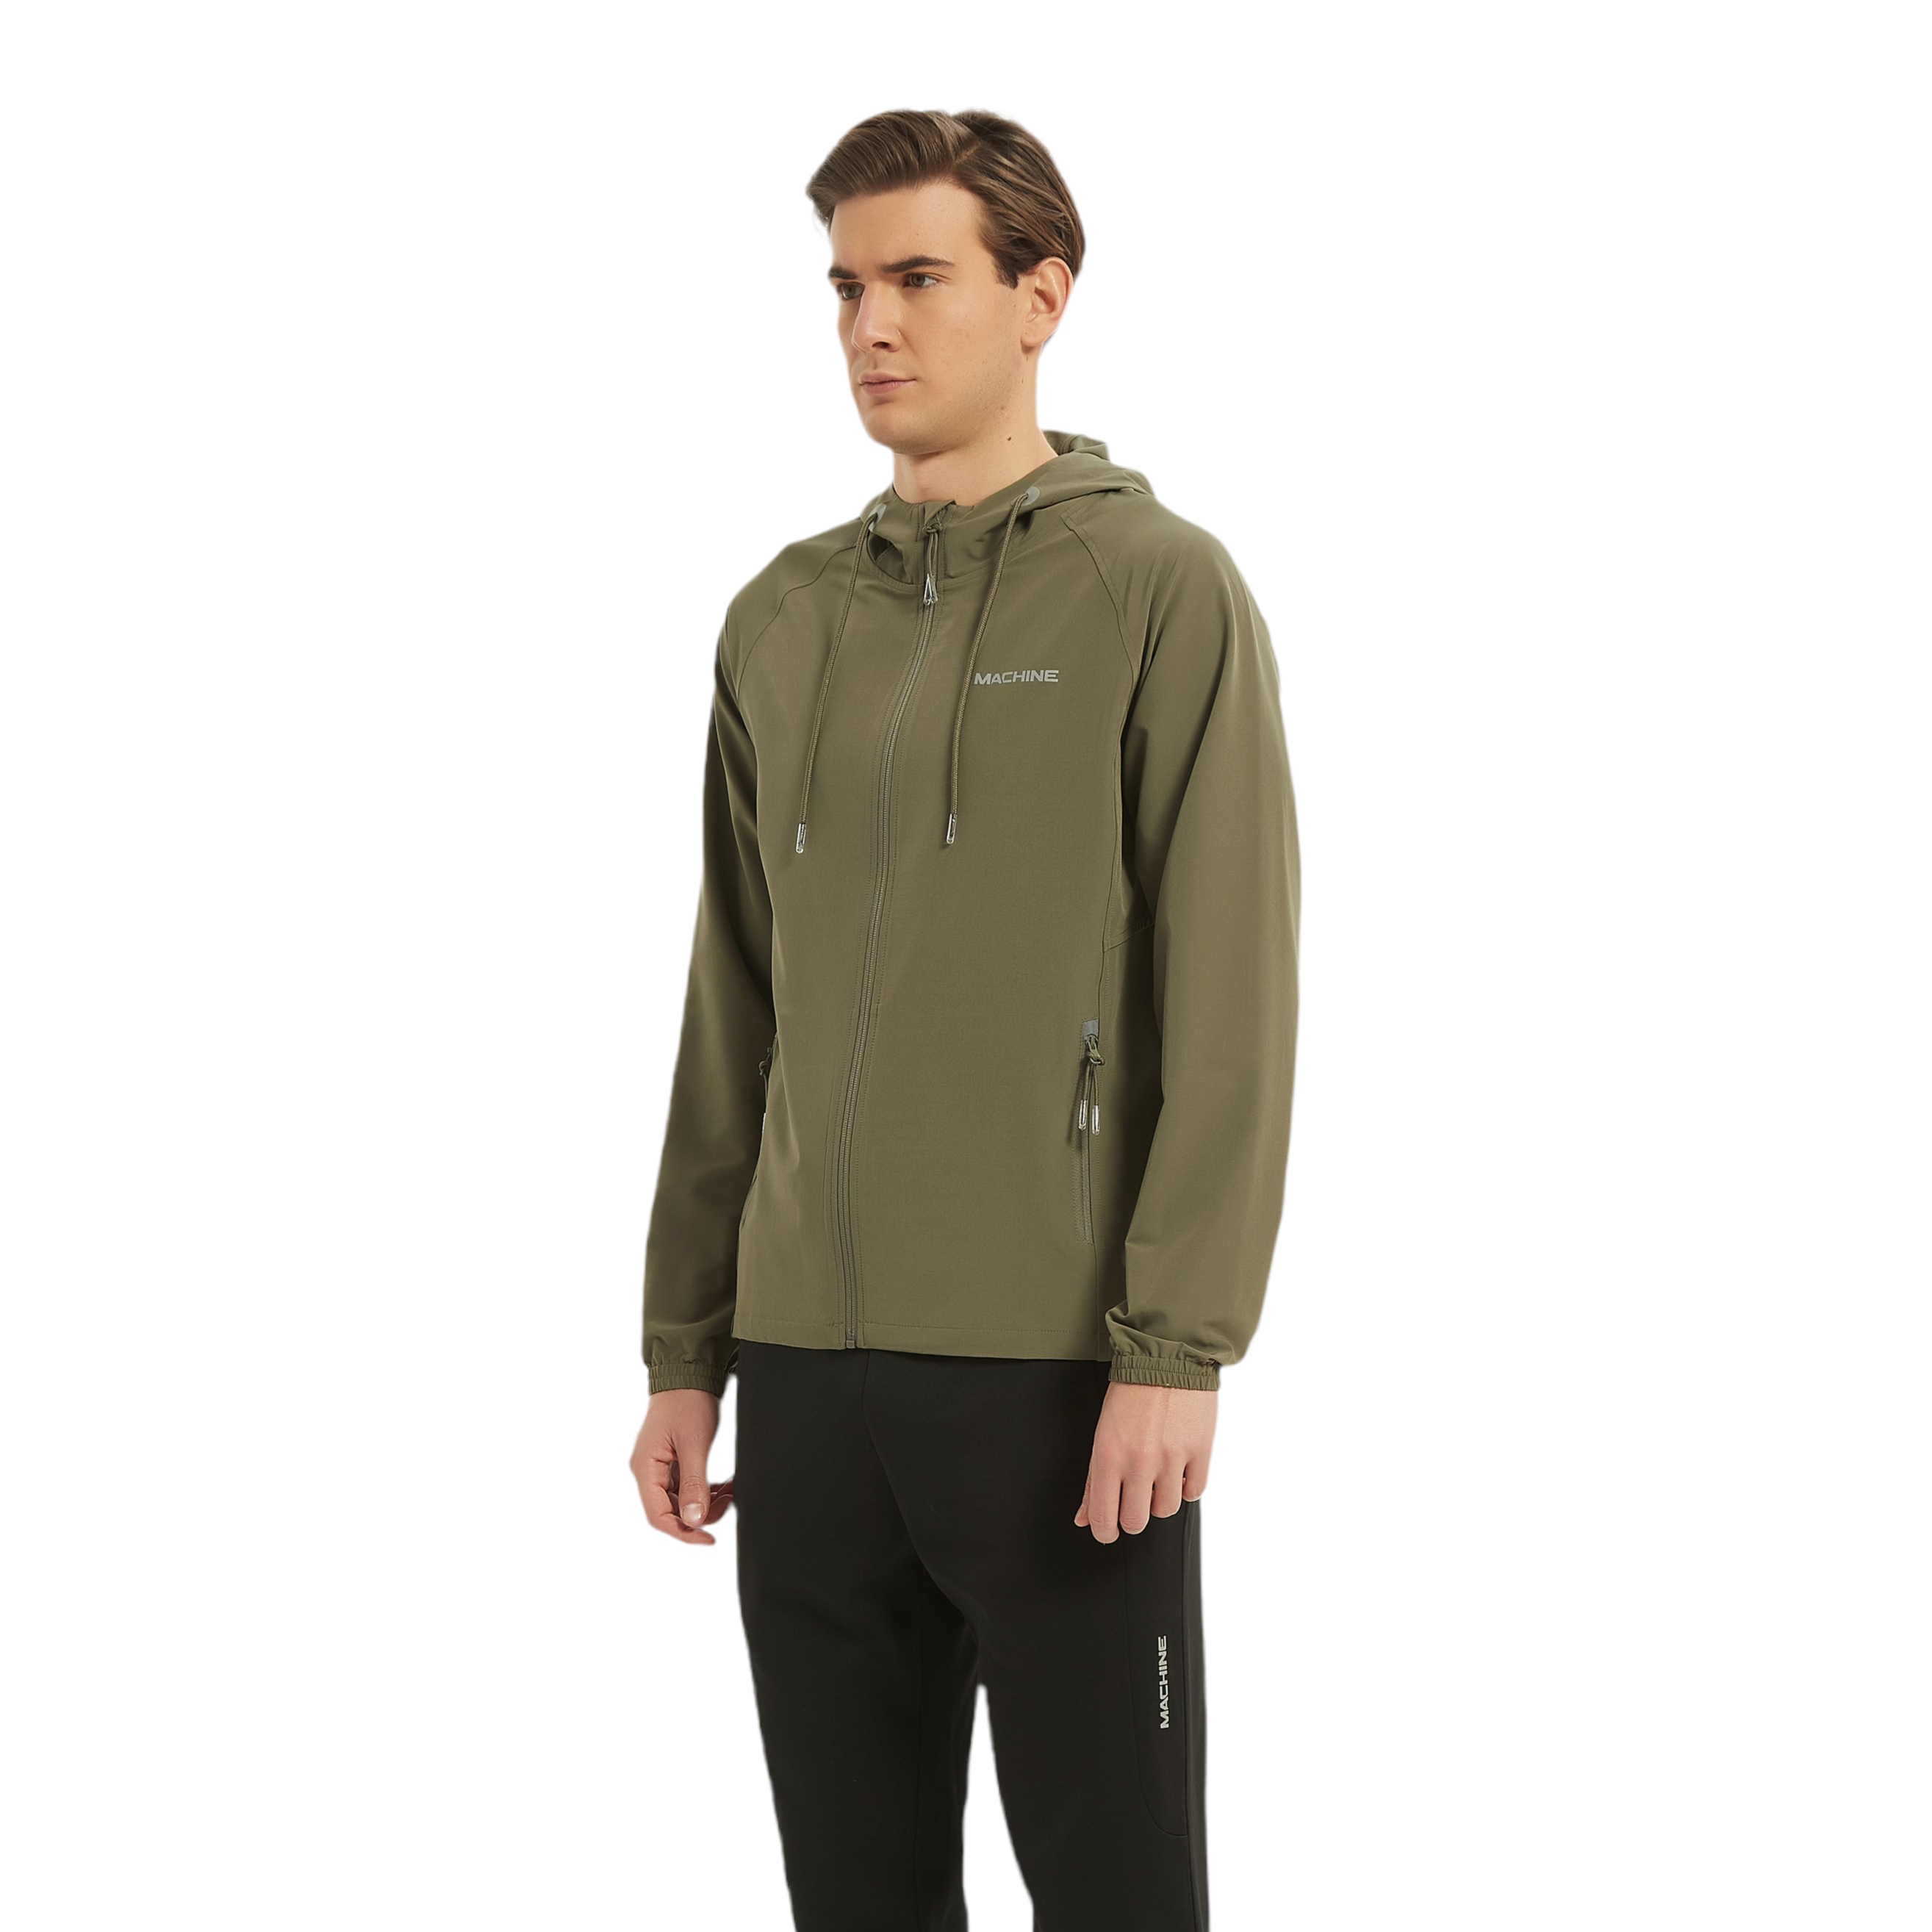 Herrie Darmen Elementair Bay Chester Trainer Jacket - Army Green – Machine Clothing Company